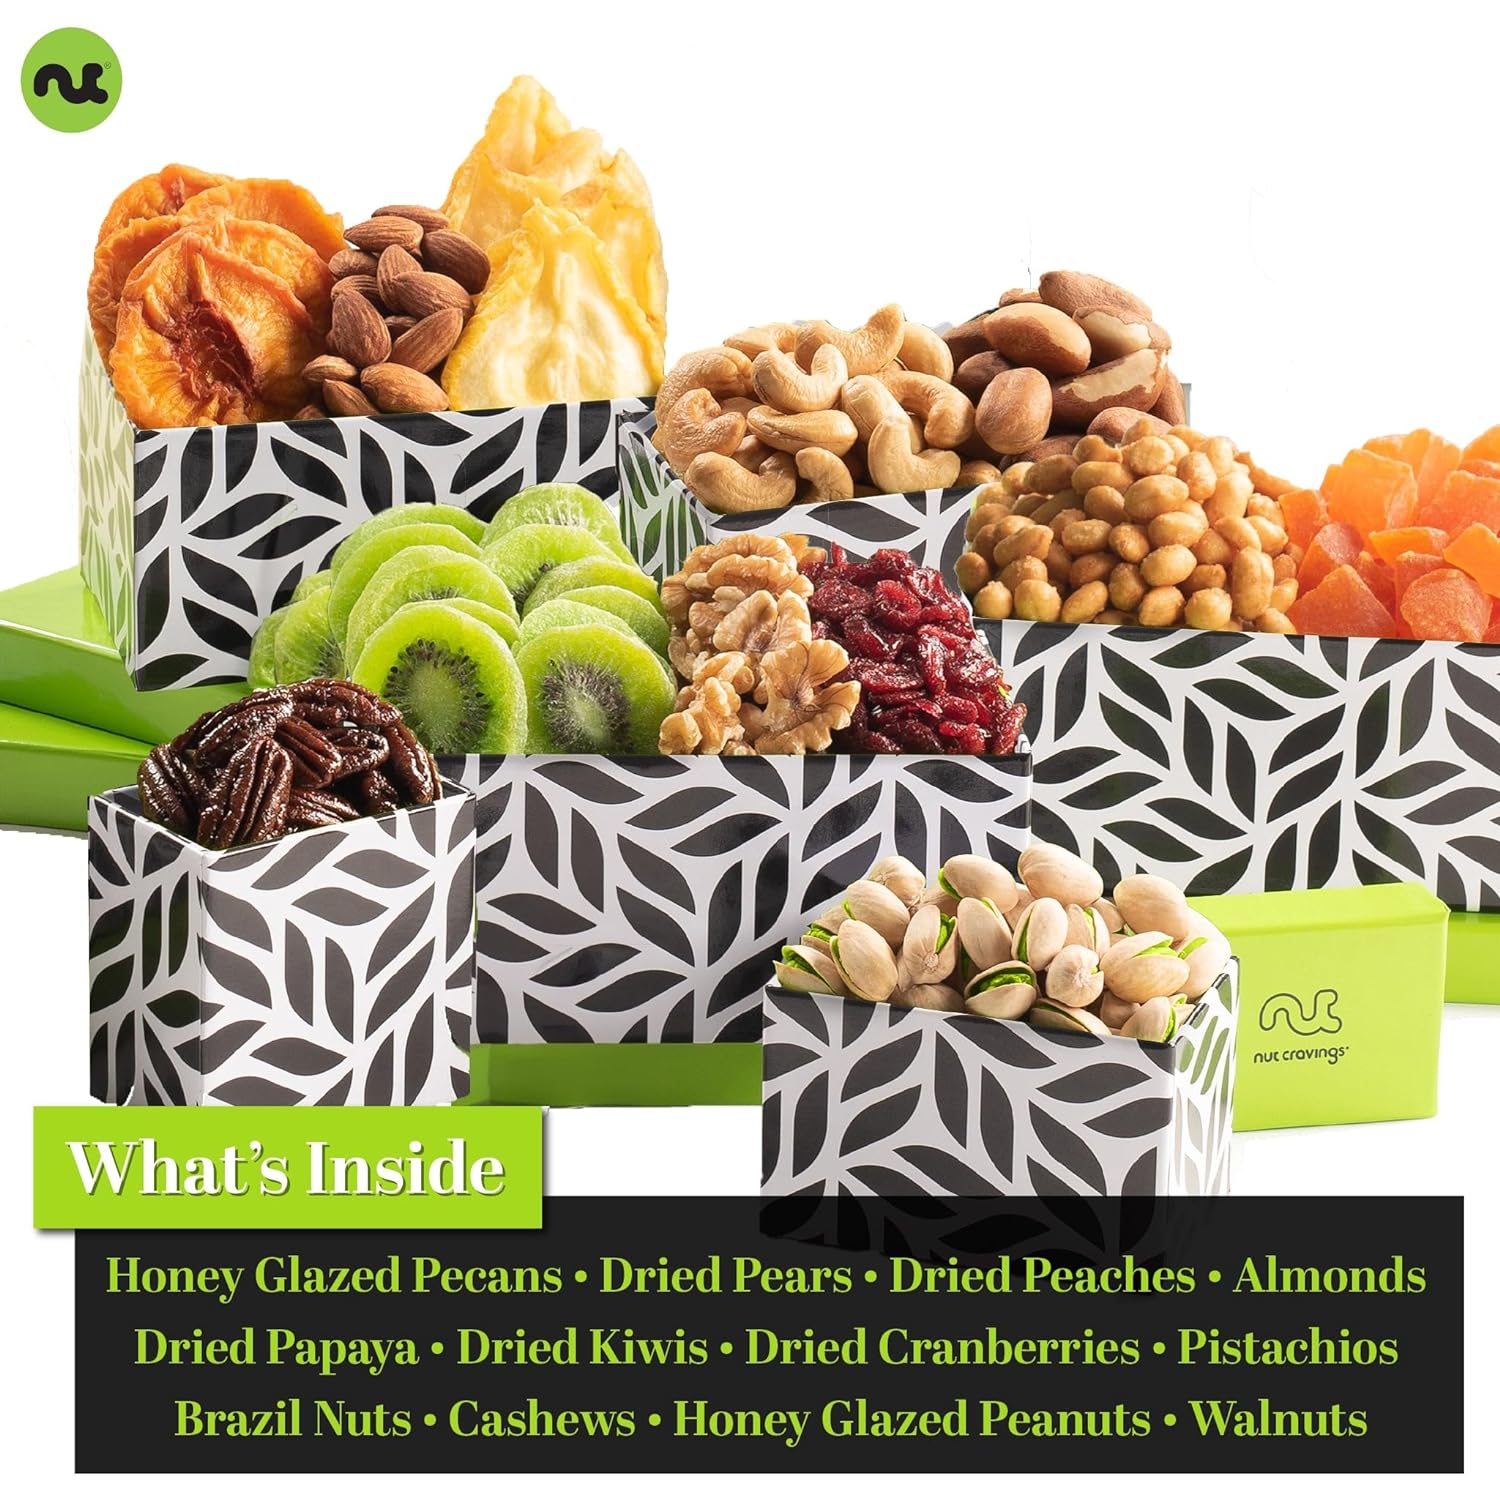 Nut Cravings Gourmet Collection - Mothers Day Dried Fruit & Mixed Nuts Gift Basket Leaf Tower + Ribbon (12 Assortments) Arrangement Platter, Birthday Care Package - Healthy Kosher : Grocery & Gourmet Food